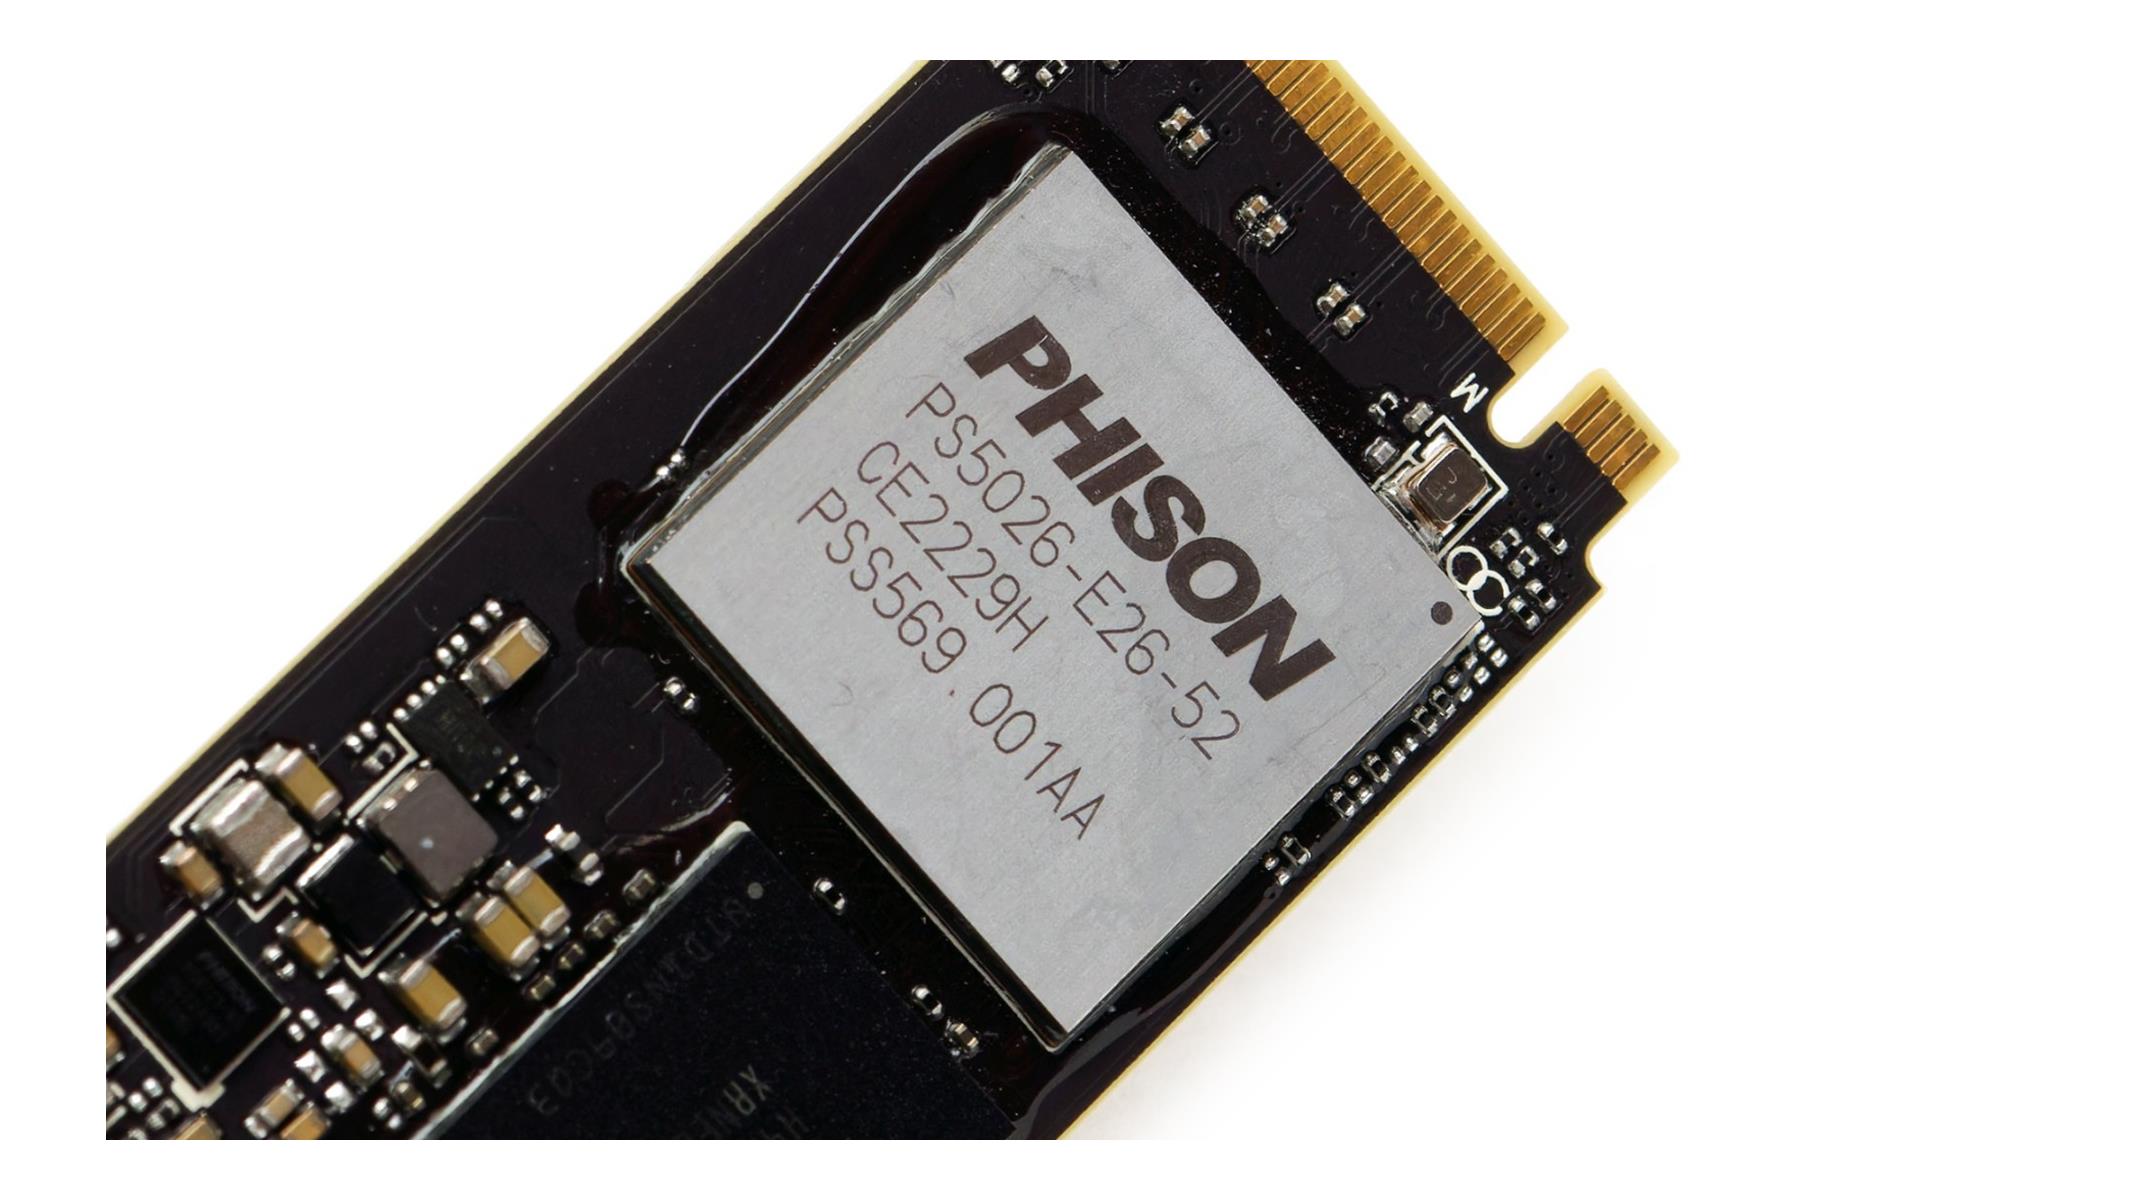 Phison CEO: PCIe Gen 5 SSDs Won't Take Off Until Late 2024